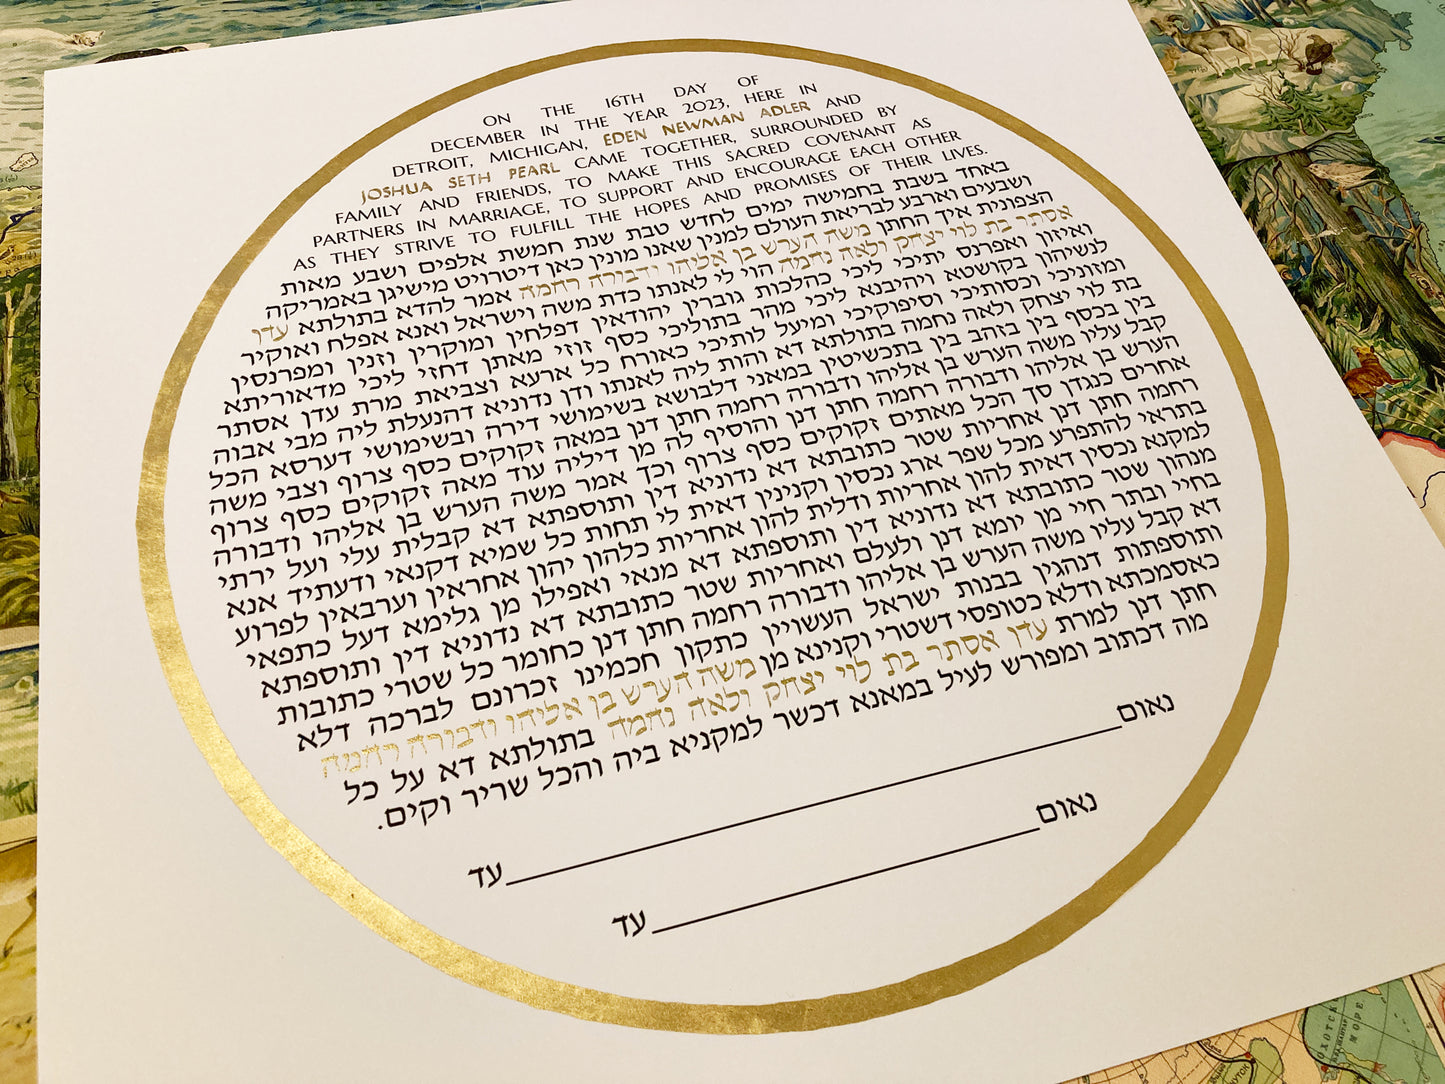 Simple Gold Ring giclée Ketubah >< with Hand Writing in gold paint for bride and groom's names